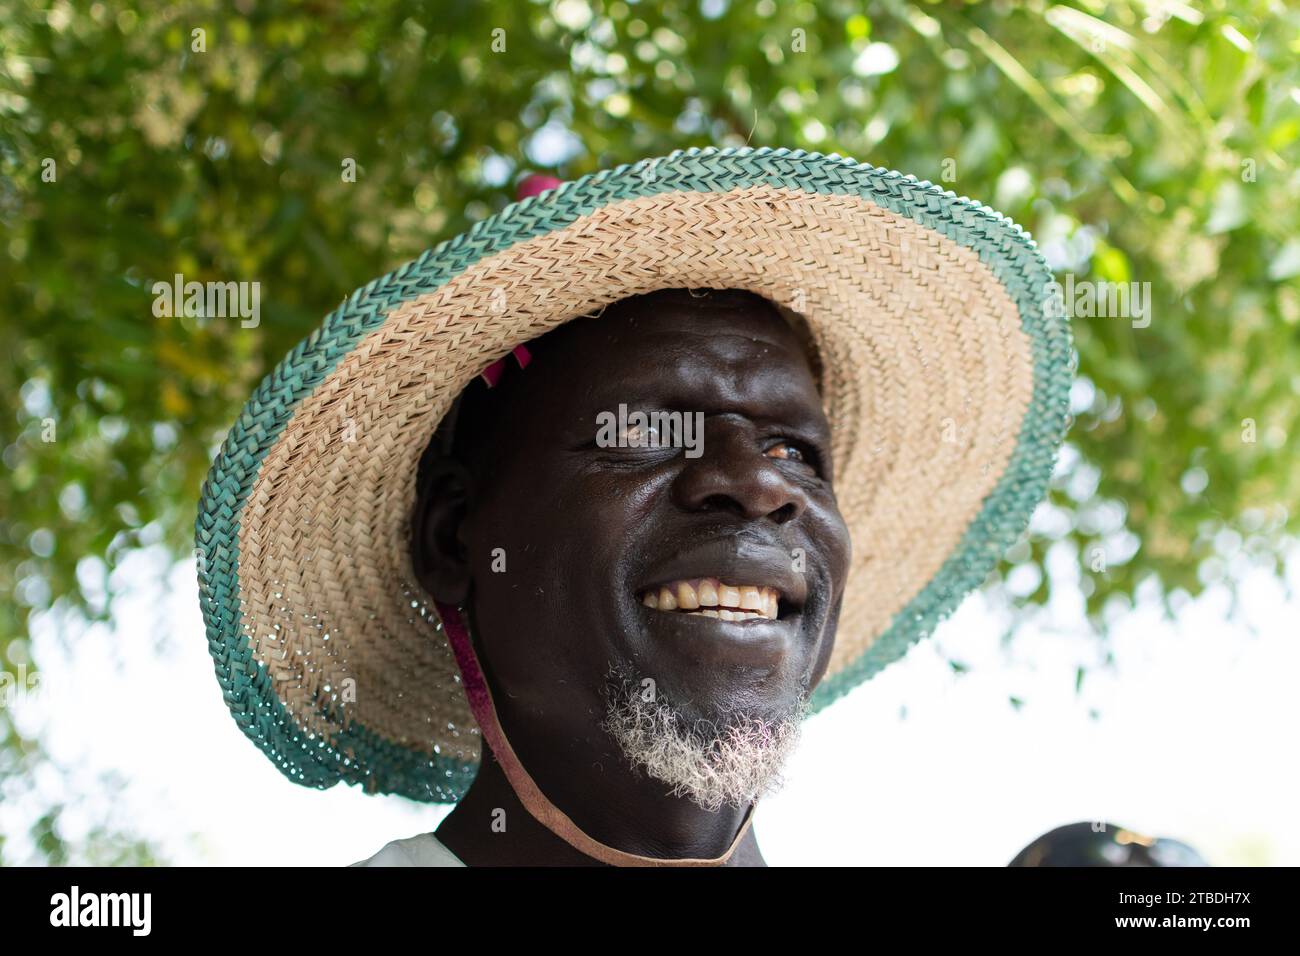 country man in africa Stock Photo